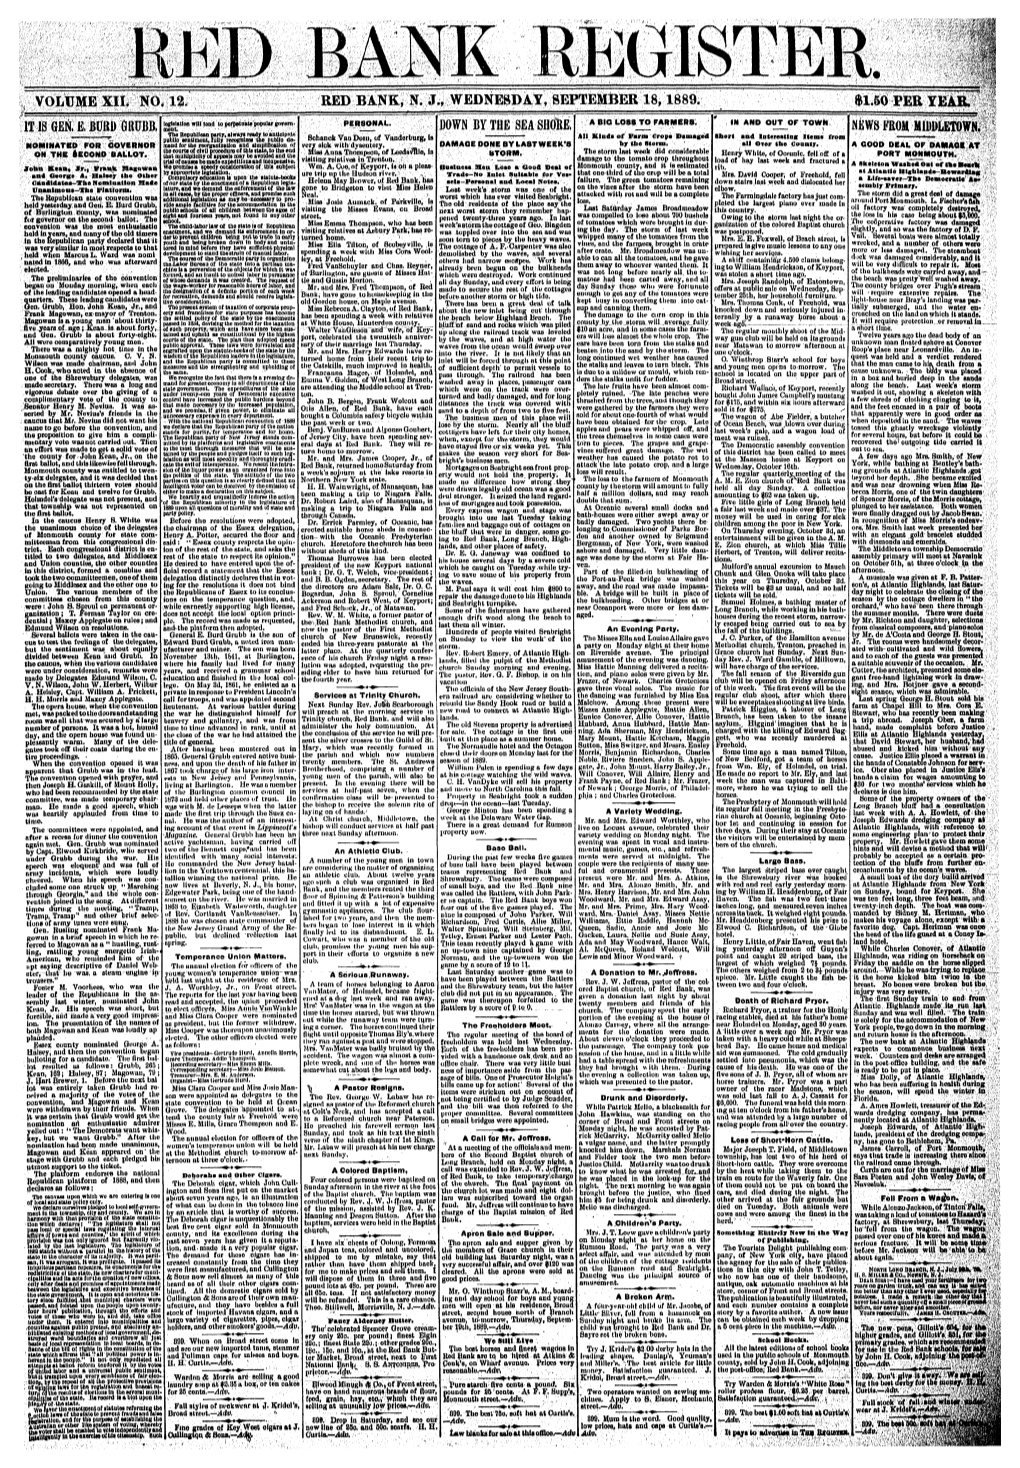 Volume Xii. No, 12. Red Bank, N. J., Wednesday, September 18,1889